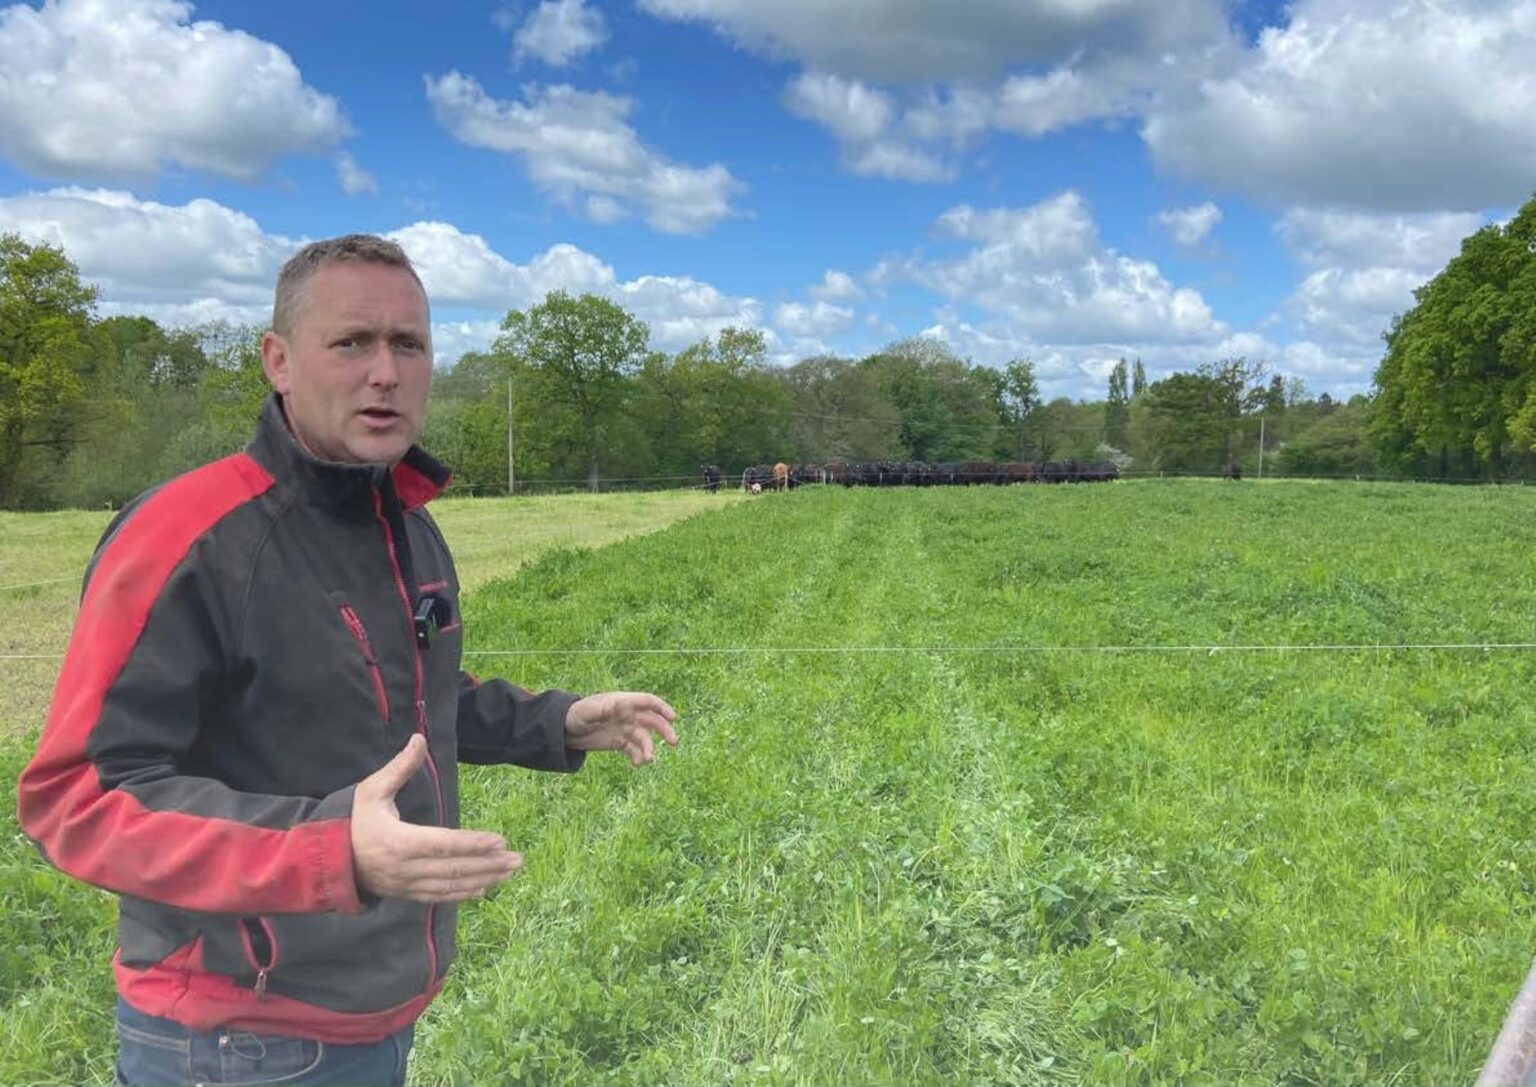 ABP PRISM 2030 farmer Ian Norbury pictured in a field in front of cattle , with bushes in the background and blue sky